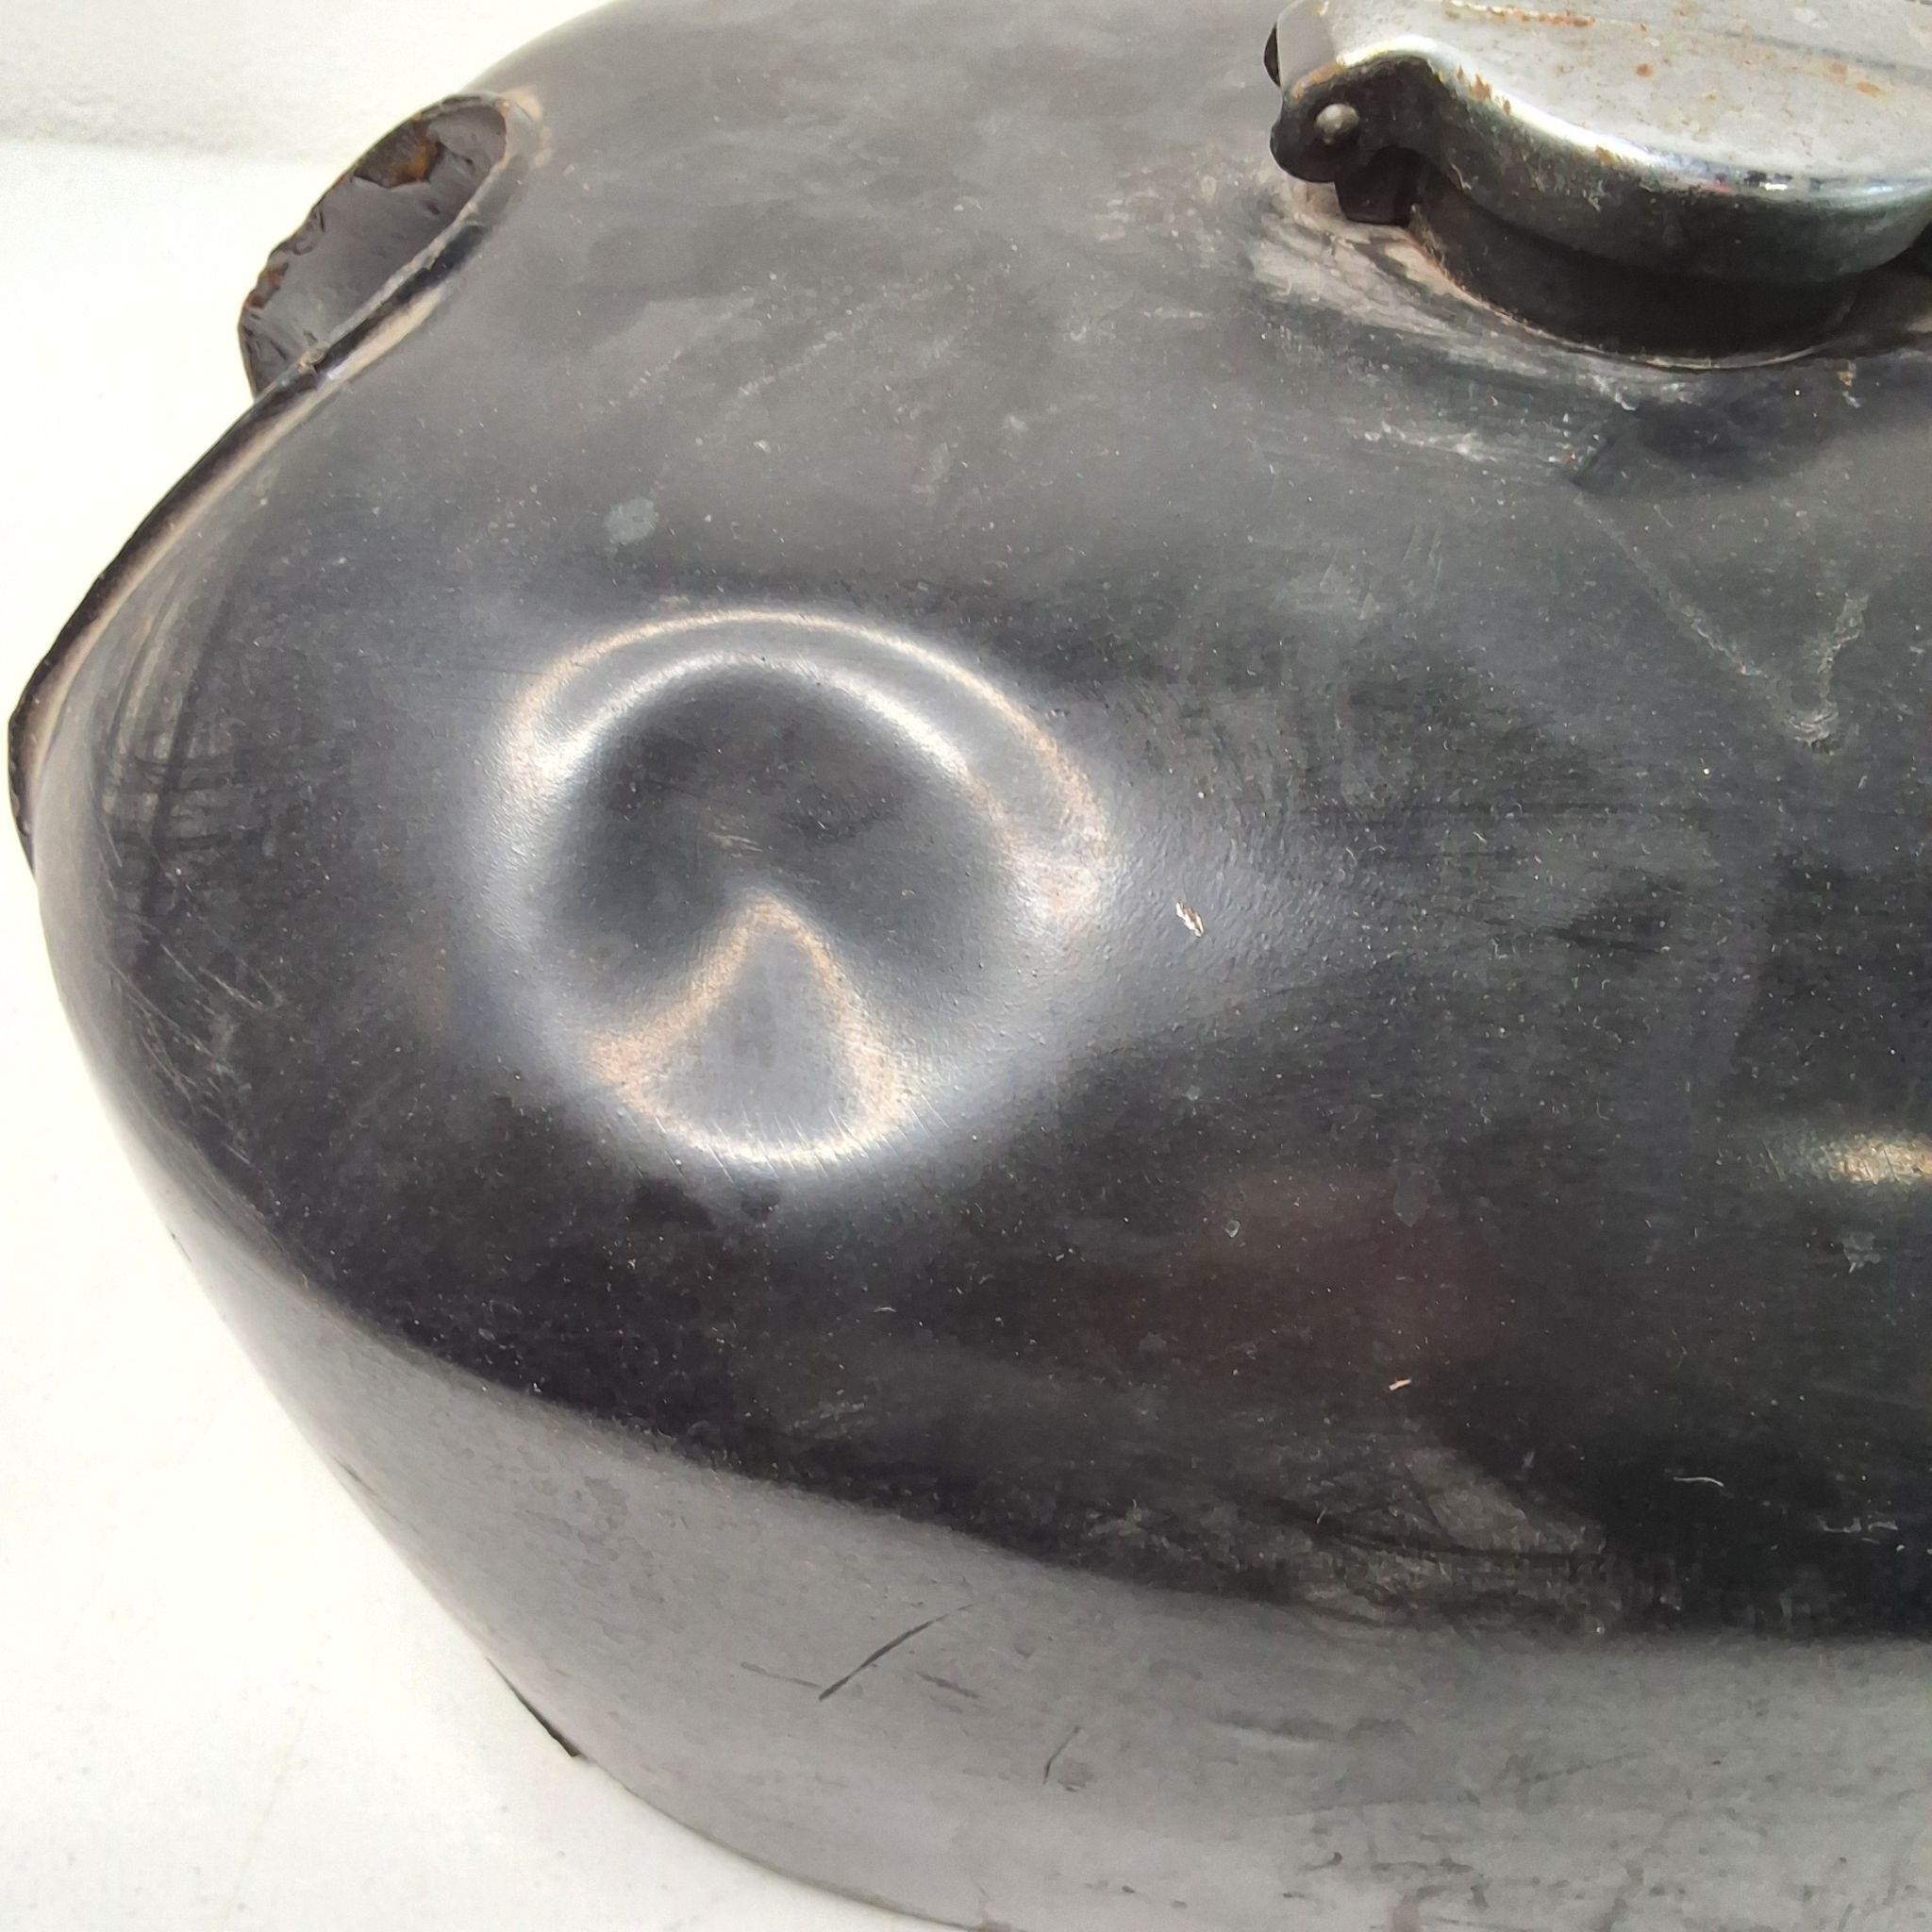 VINTAGE MOTORCYCLE GAS TANKS-COVERS AND MORE